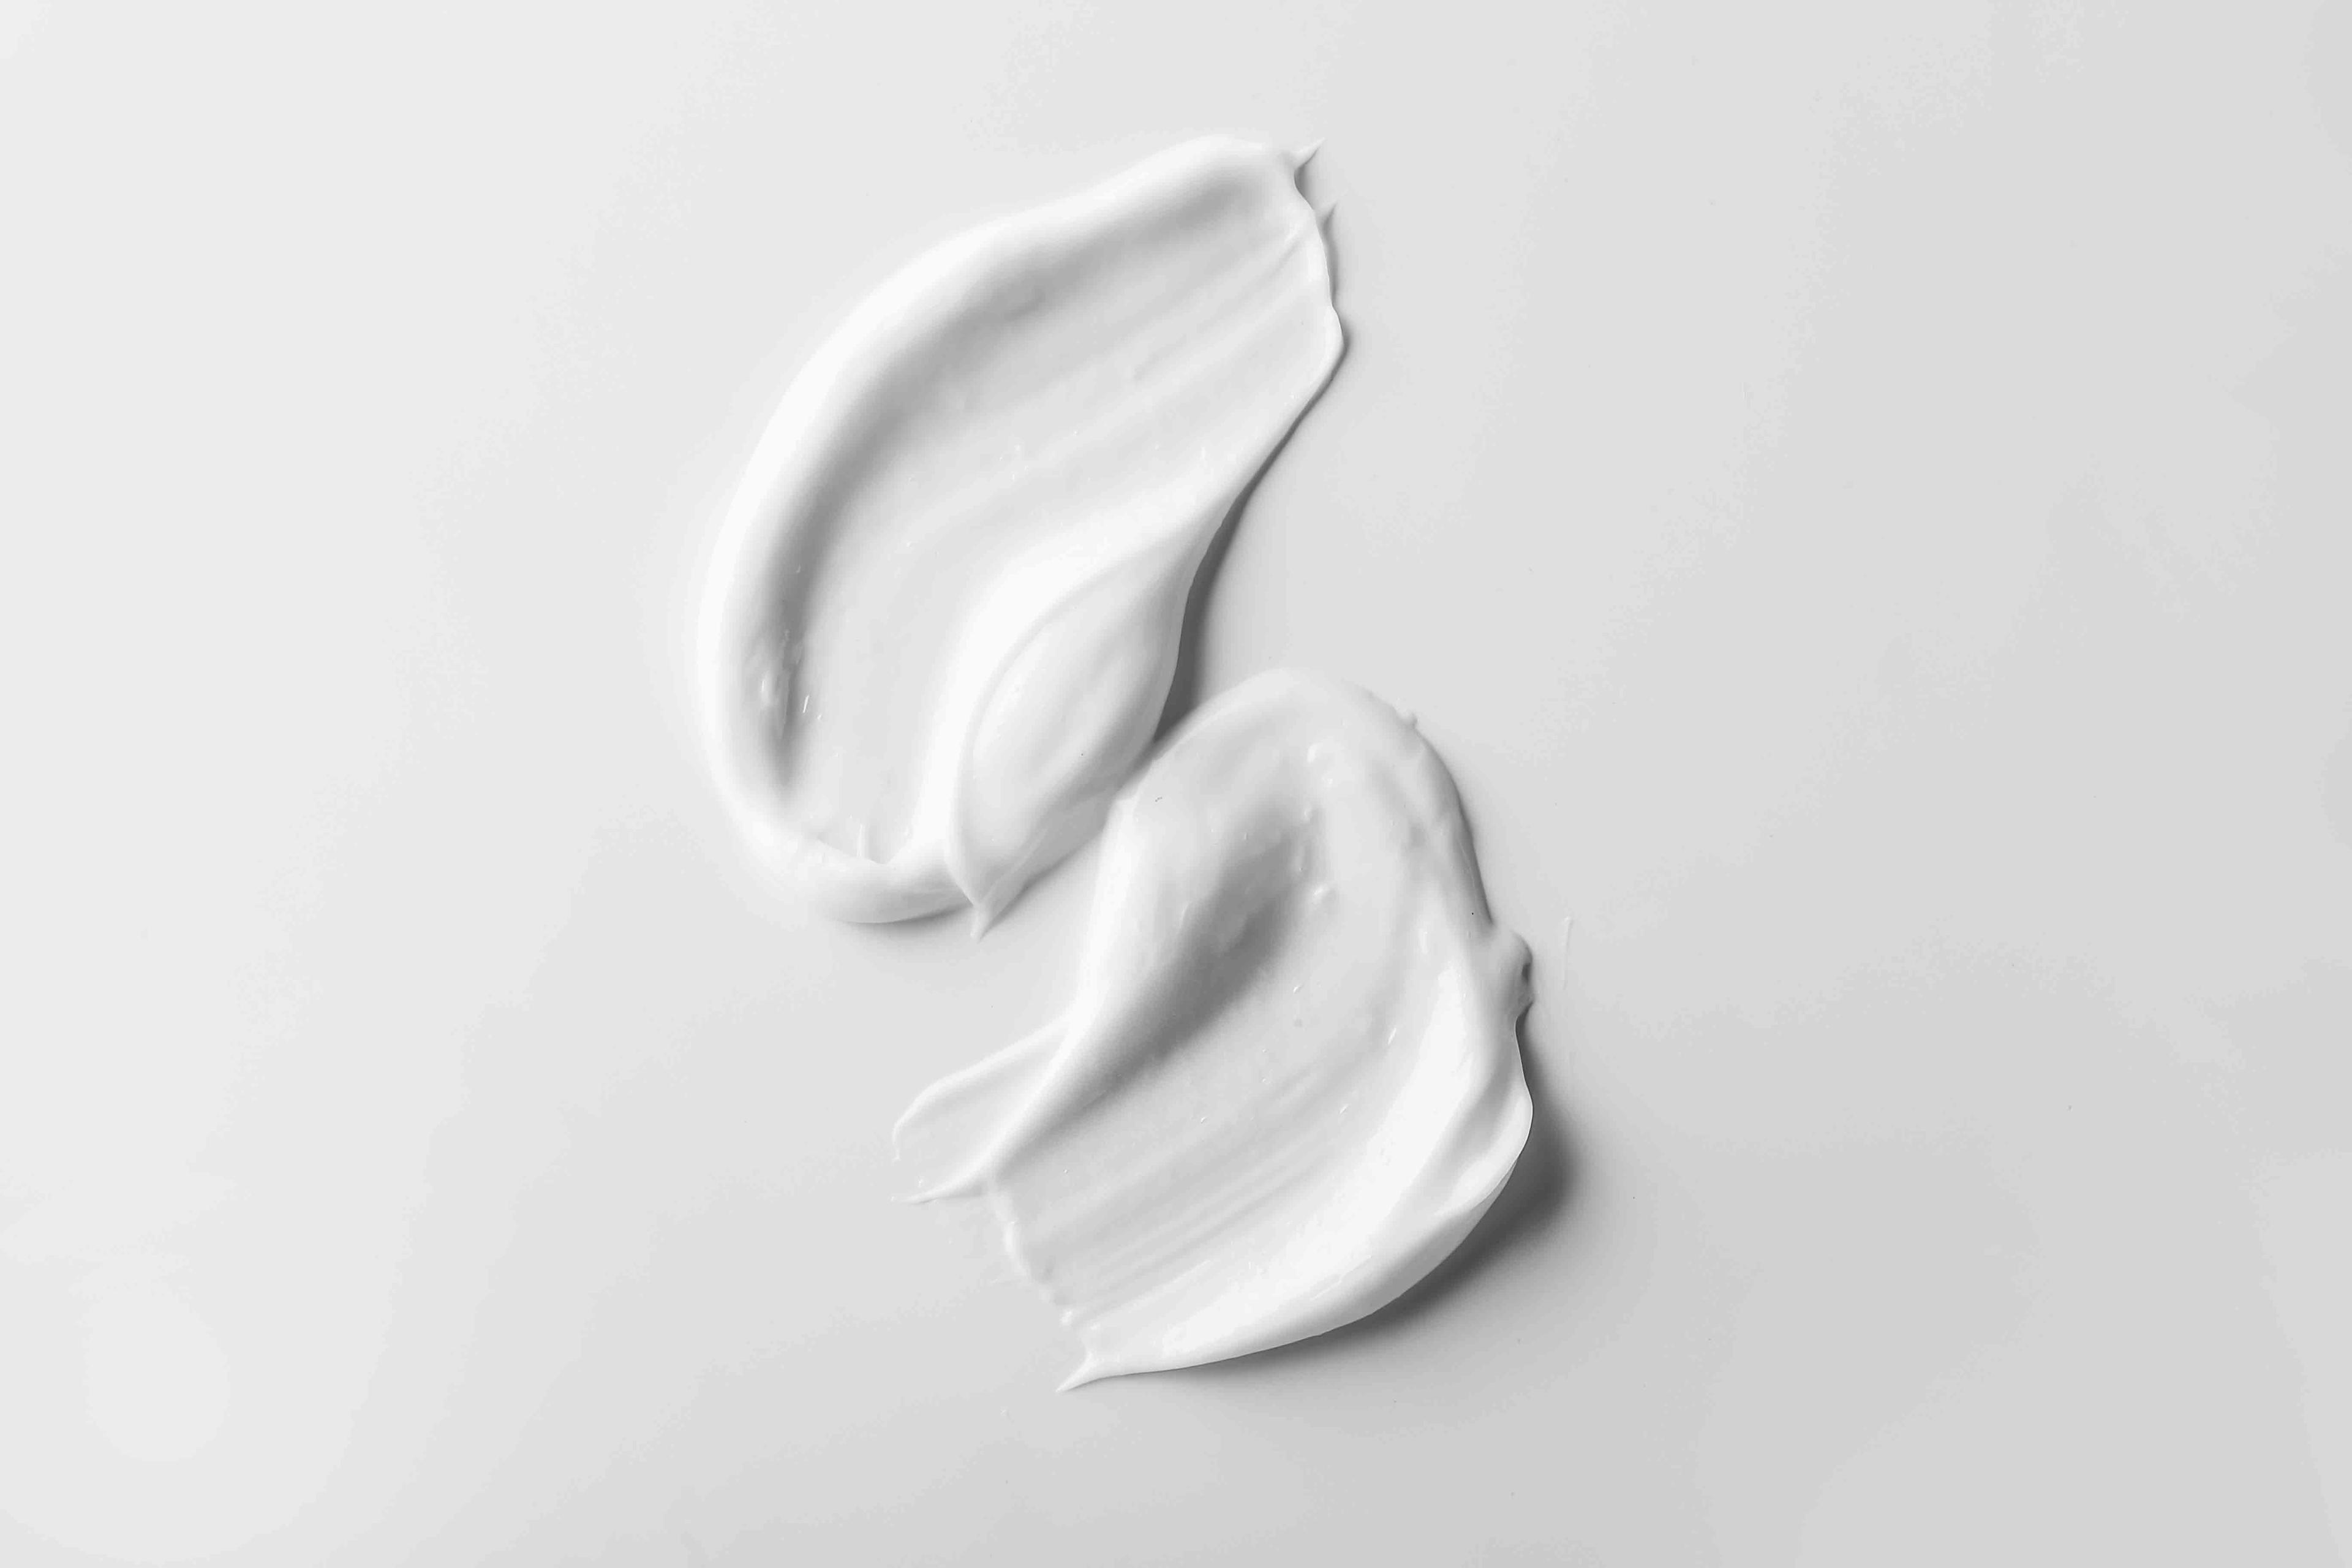 Two smears of white cream on a white background.